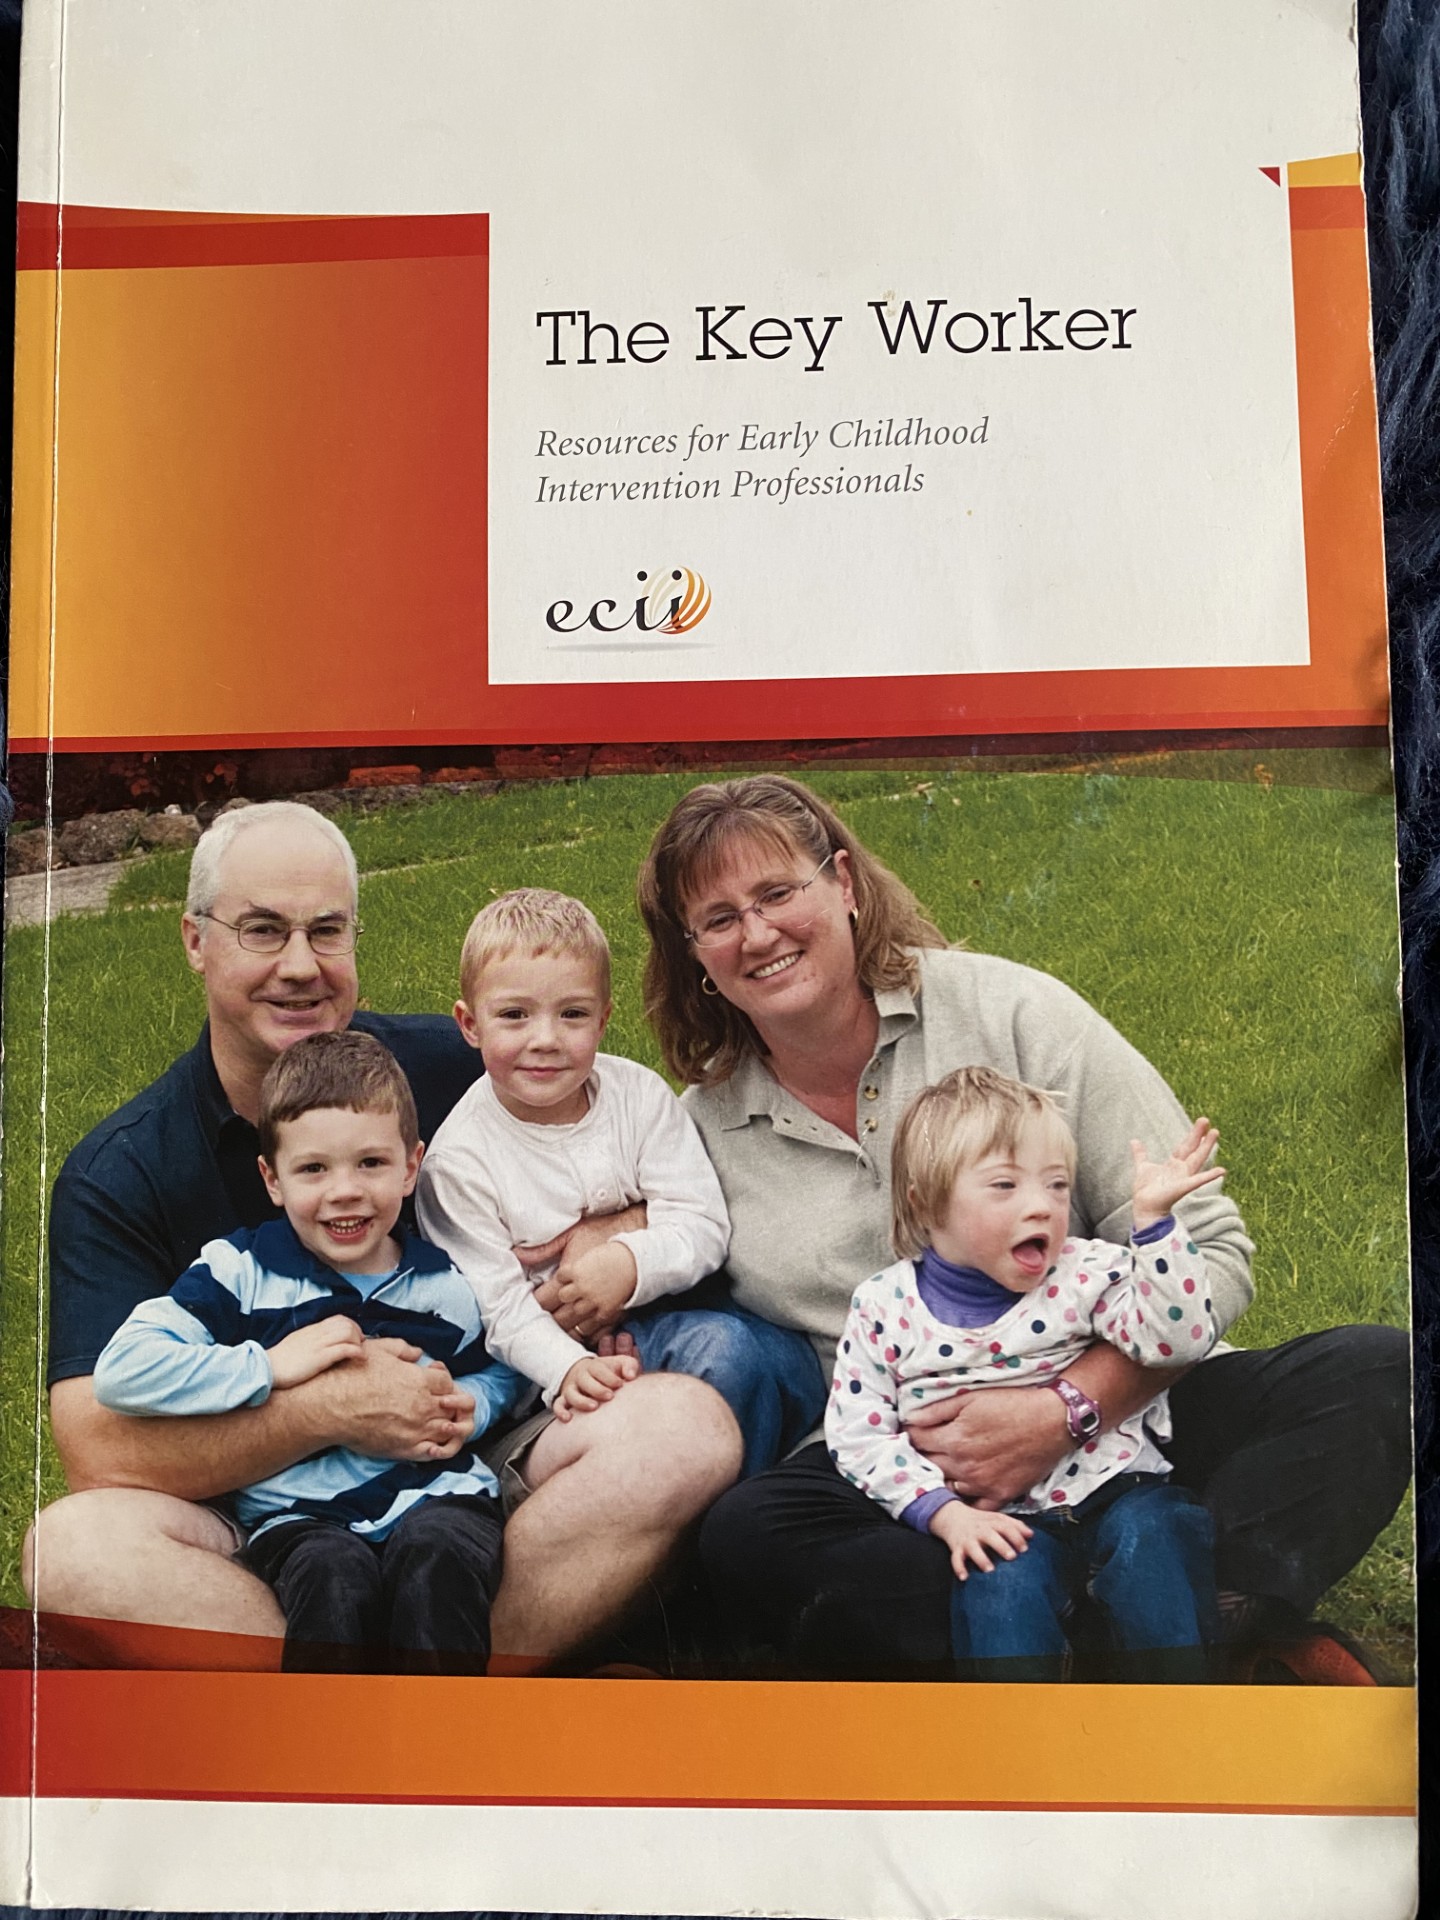 Words - The Key Worker, Resources for Early Childhood Intervention Professionals. Letters - ecii. Photograph of a family of five, sitting cross-legged on grass. Two young boys sitting on their father's lap and a small girl sitting on her mother's lap.